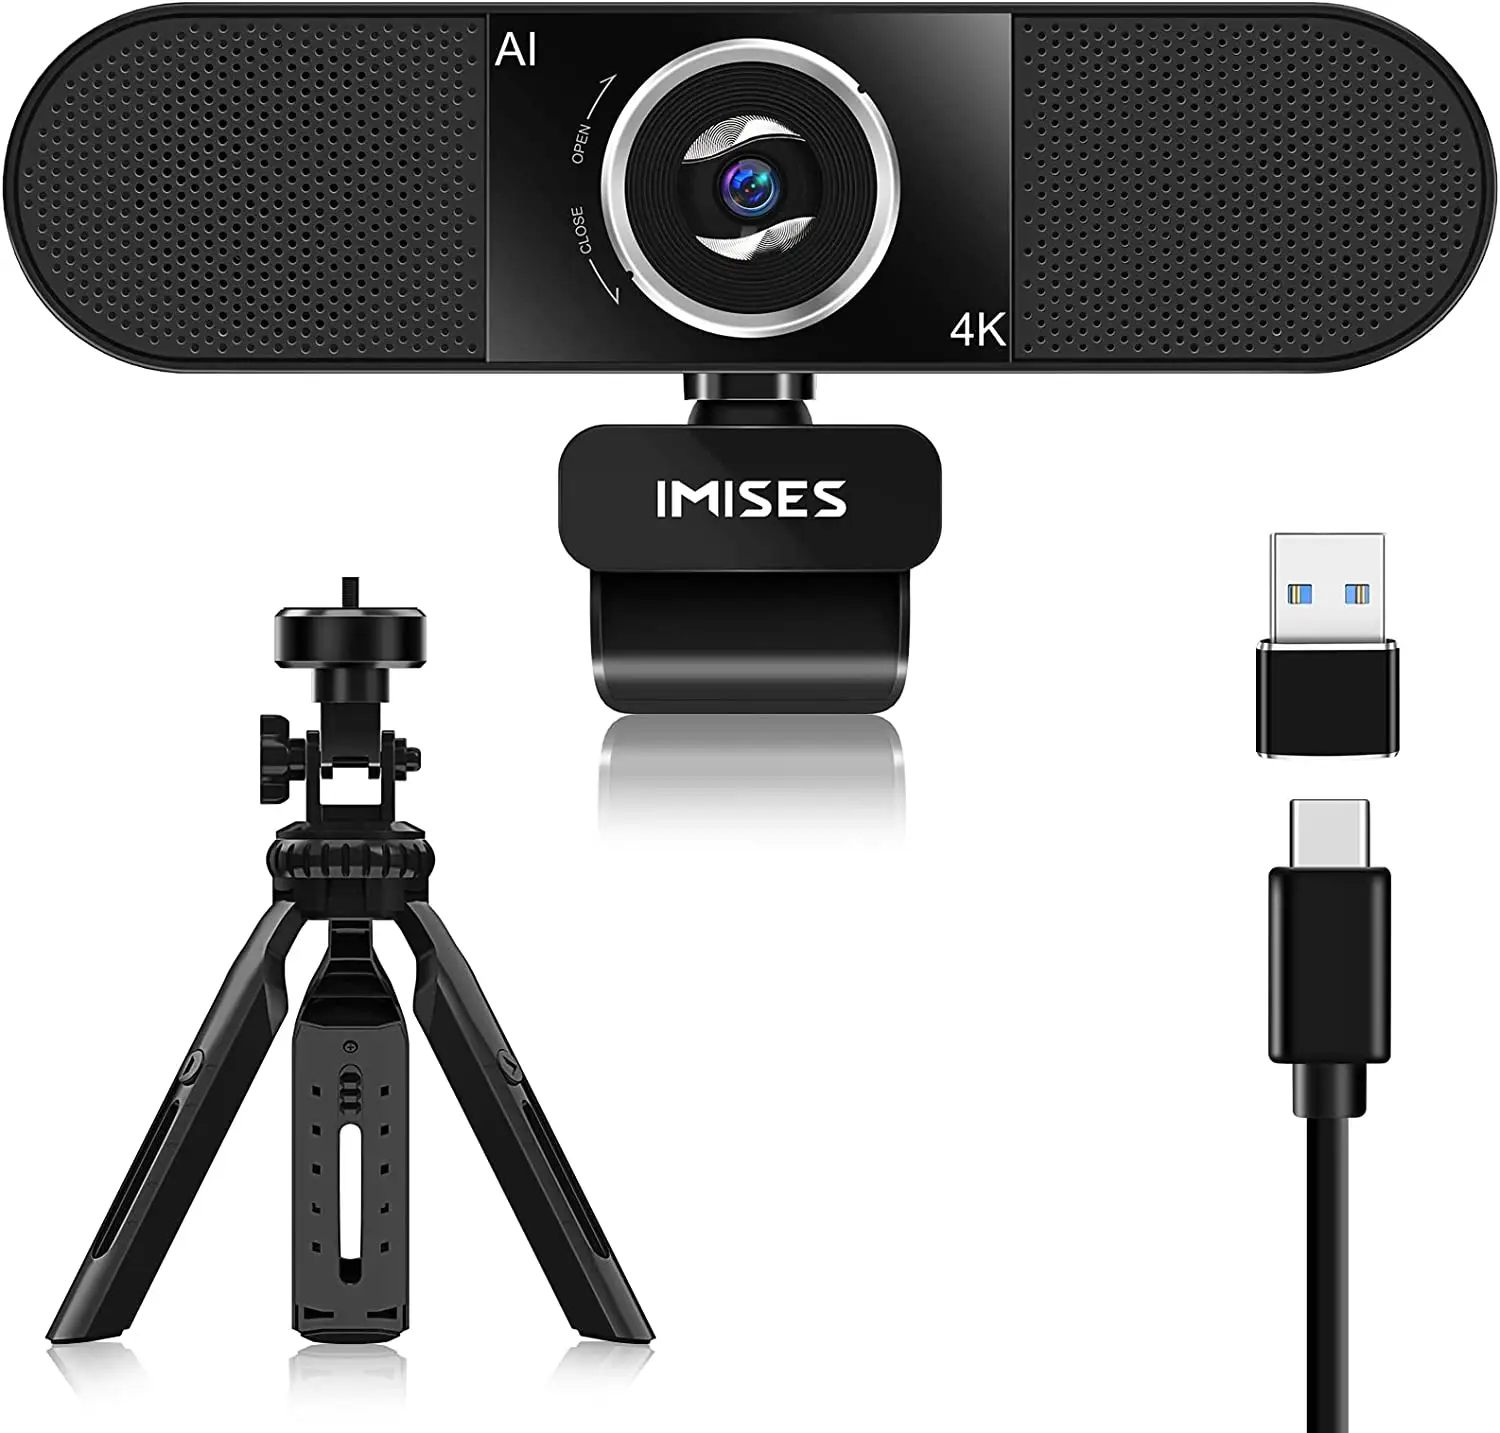 3-in-1 Webcam - UHD 4K Video Conference Camera with AI-Powered Auto Framing & Autofocus, Noise Reduction Computer Camera, Lens